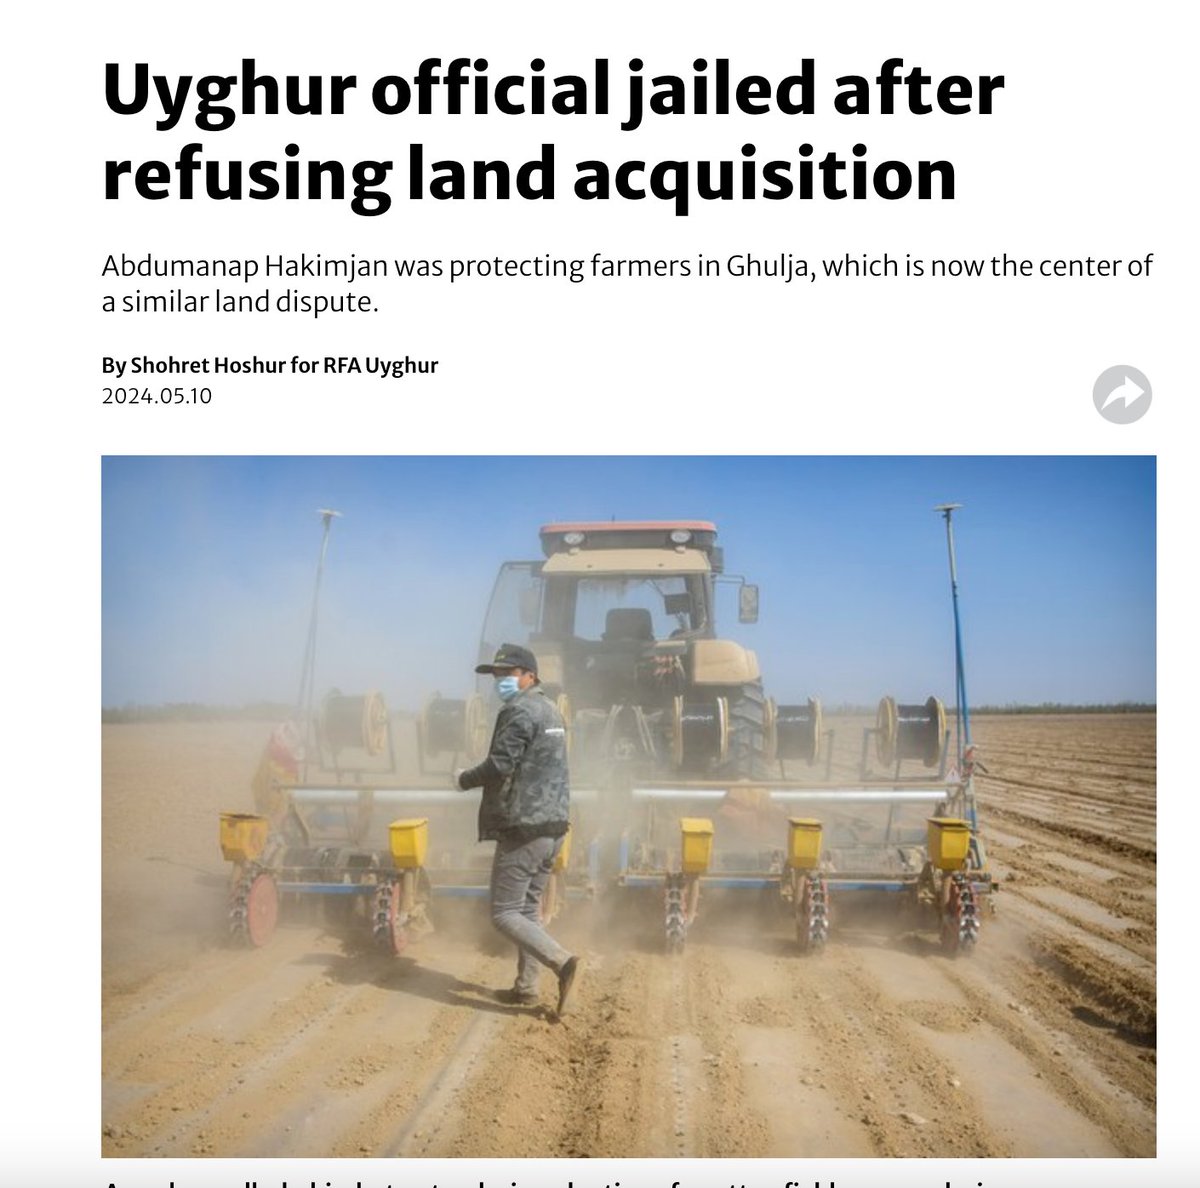 Two land grab stories point to a key part of the ongoing atrocities in Uyghur homelands: Uyghurs refusing to hand over land to Han developers or corporations are placed in detention. rfa.org/english/news/u… rfa.org/english/news/u…